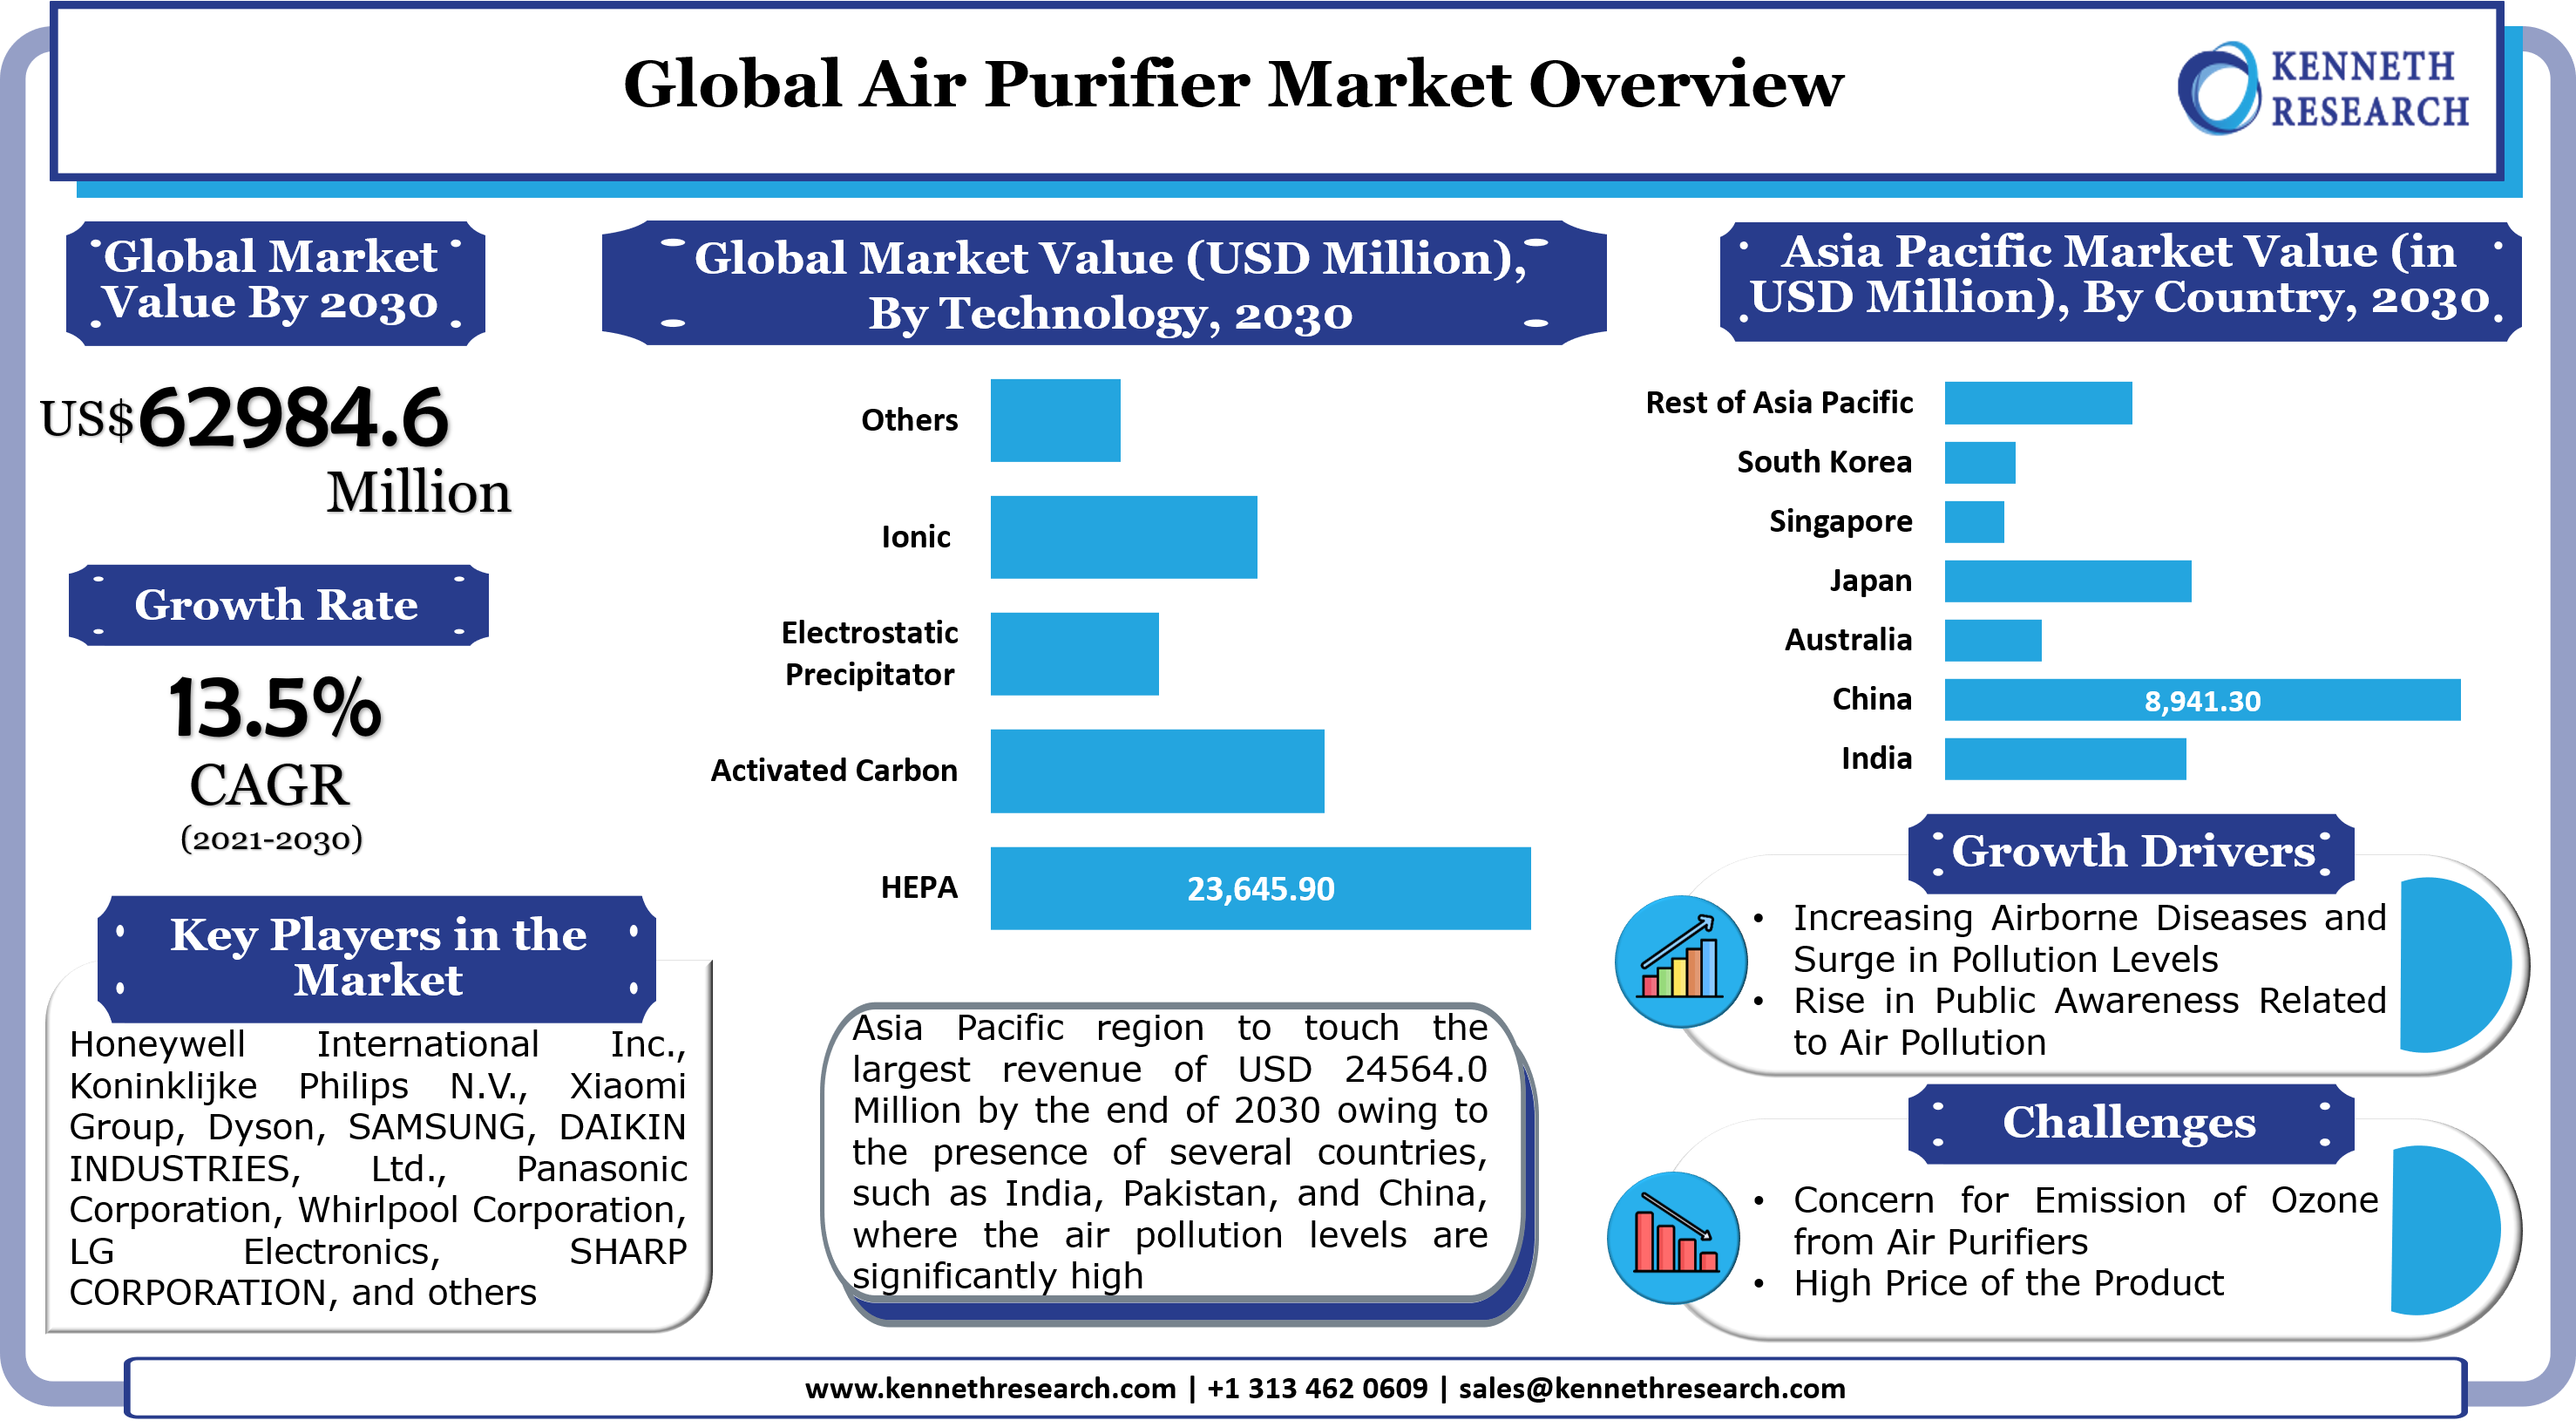 Global Air Purifier Market Industry Analysis & Scope